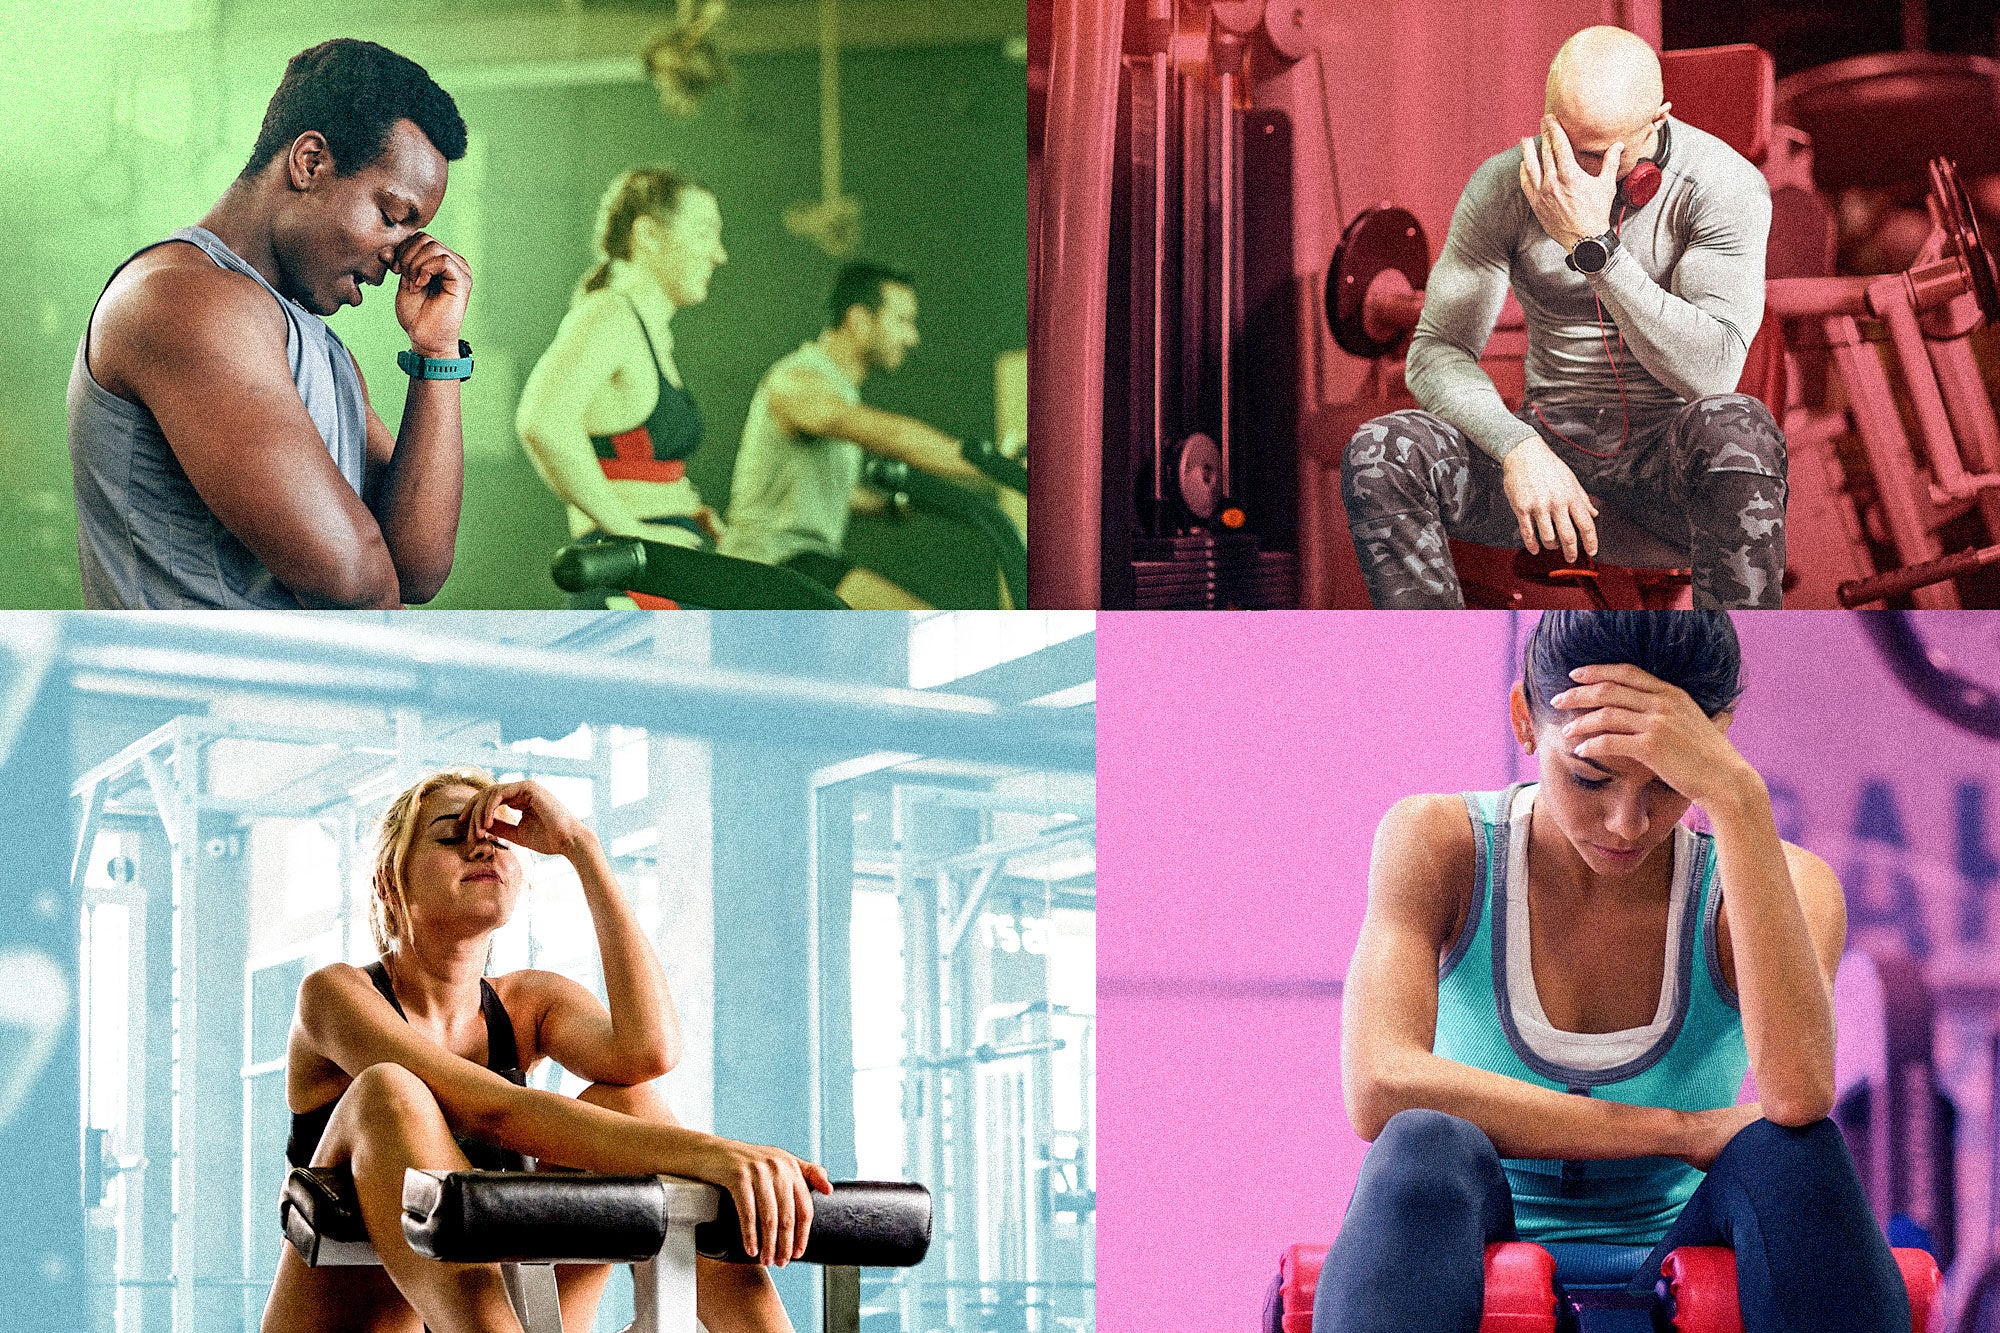 A grid of people crying at the gym while working out. 